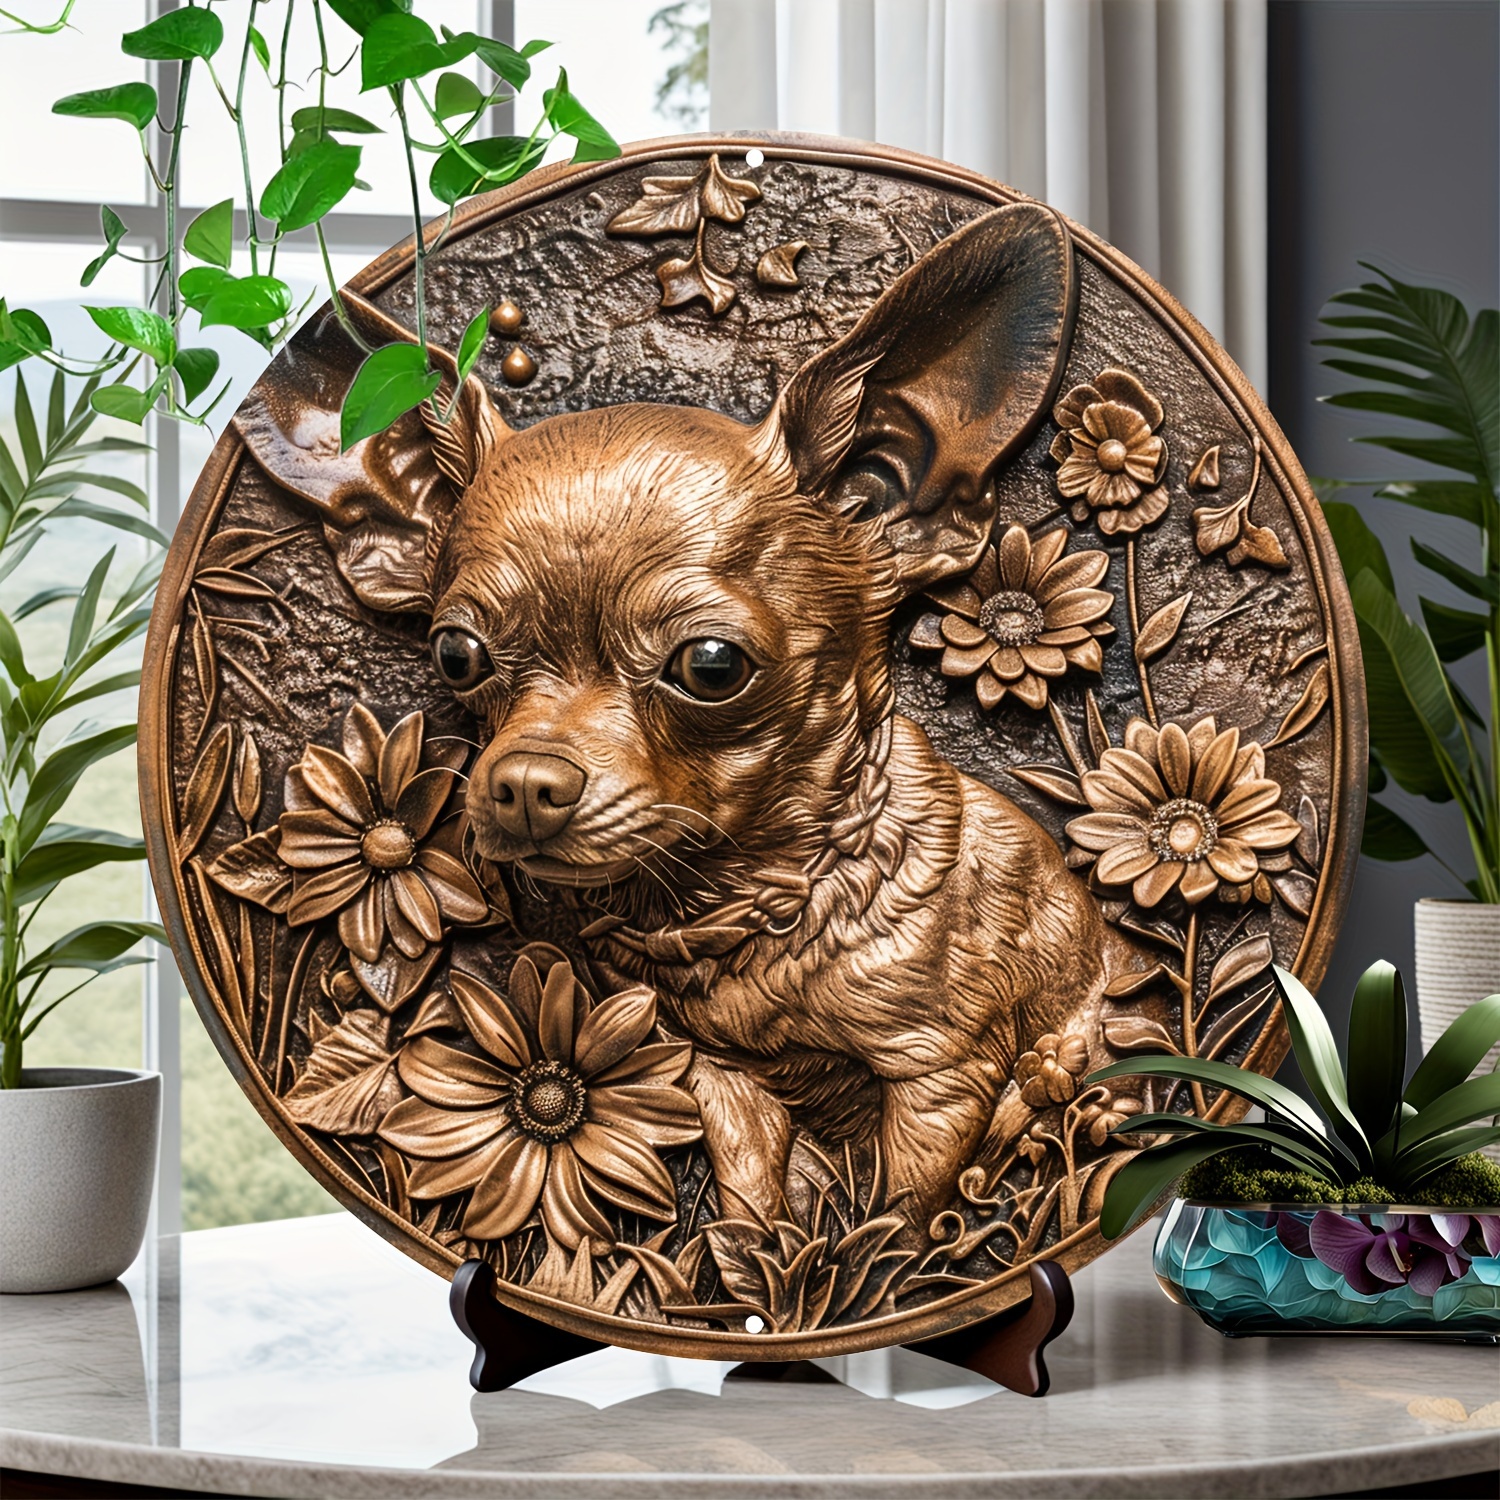 

Vintage Chihuahua Dog Aluminum Wall Art - 8x8 Inch Round Metal Sign For Home, Bathroom, Garage & Cafe Decor